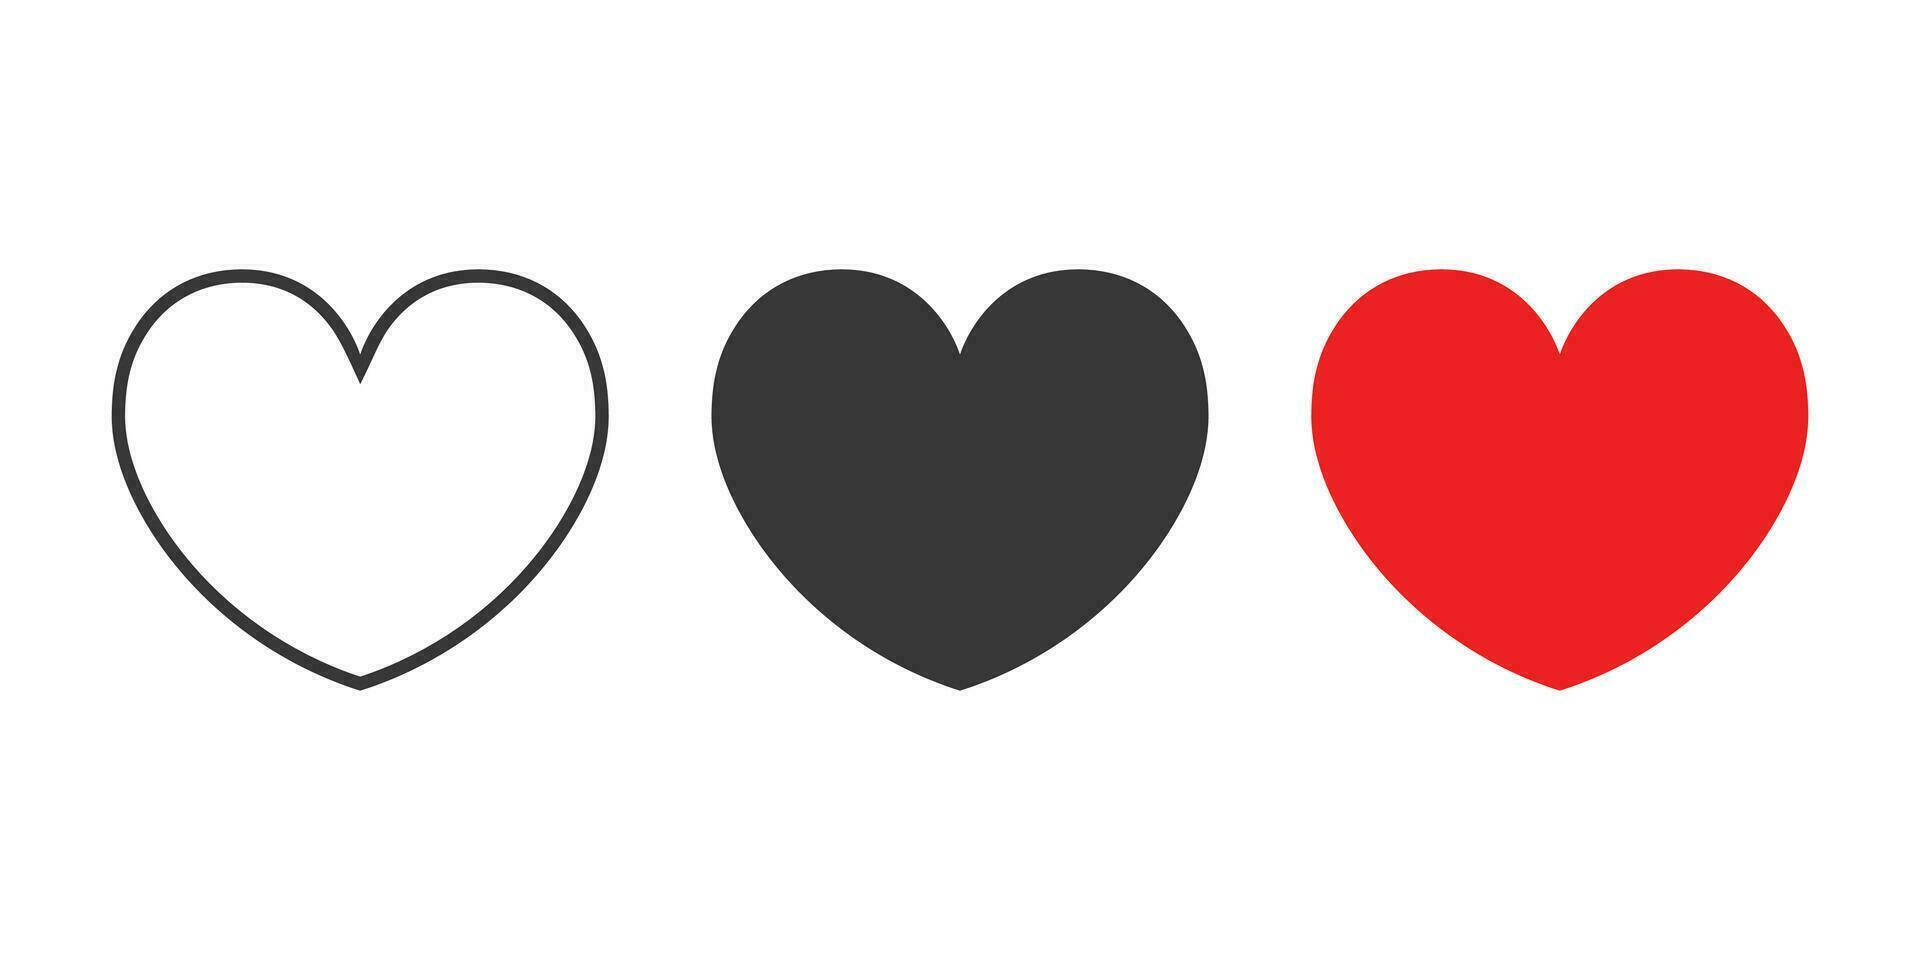 Hearts icons set. Red, back, and outline heart icon set. Vector illustration.